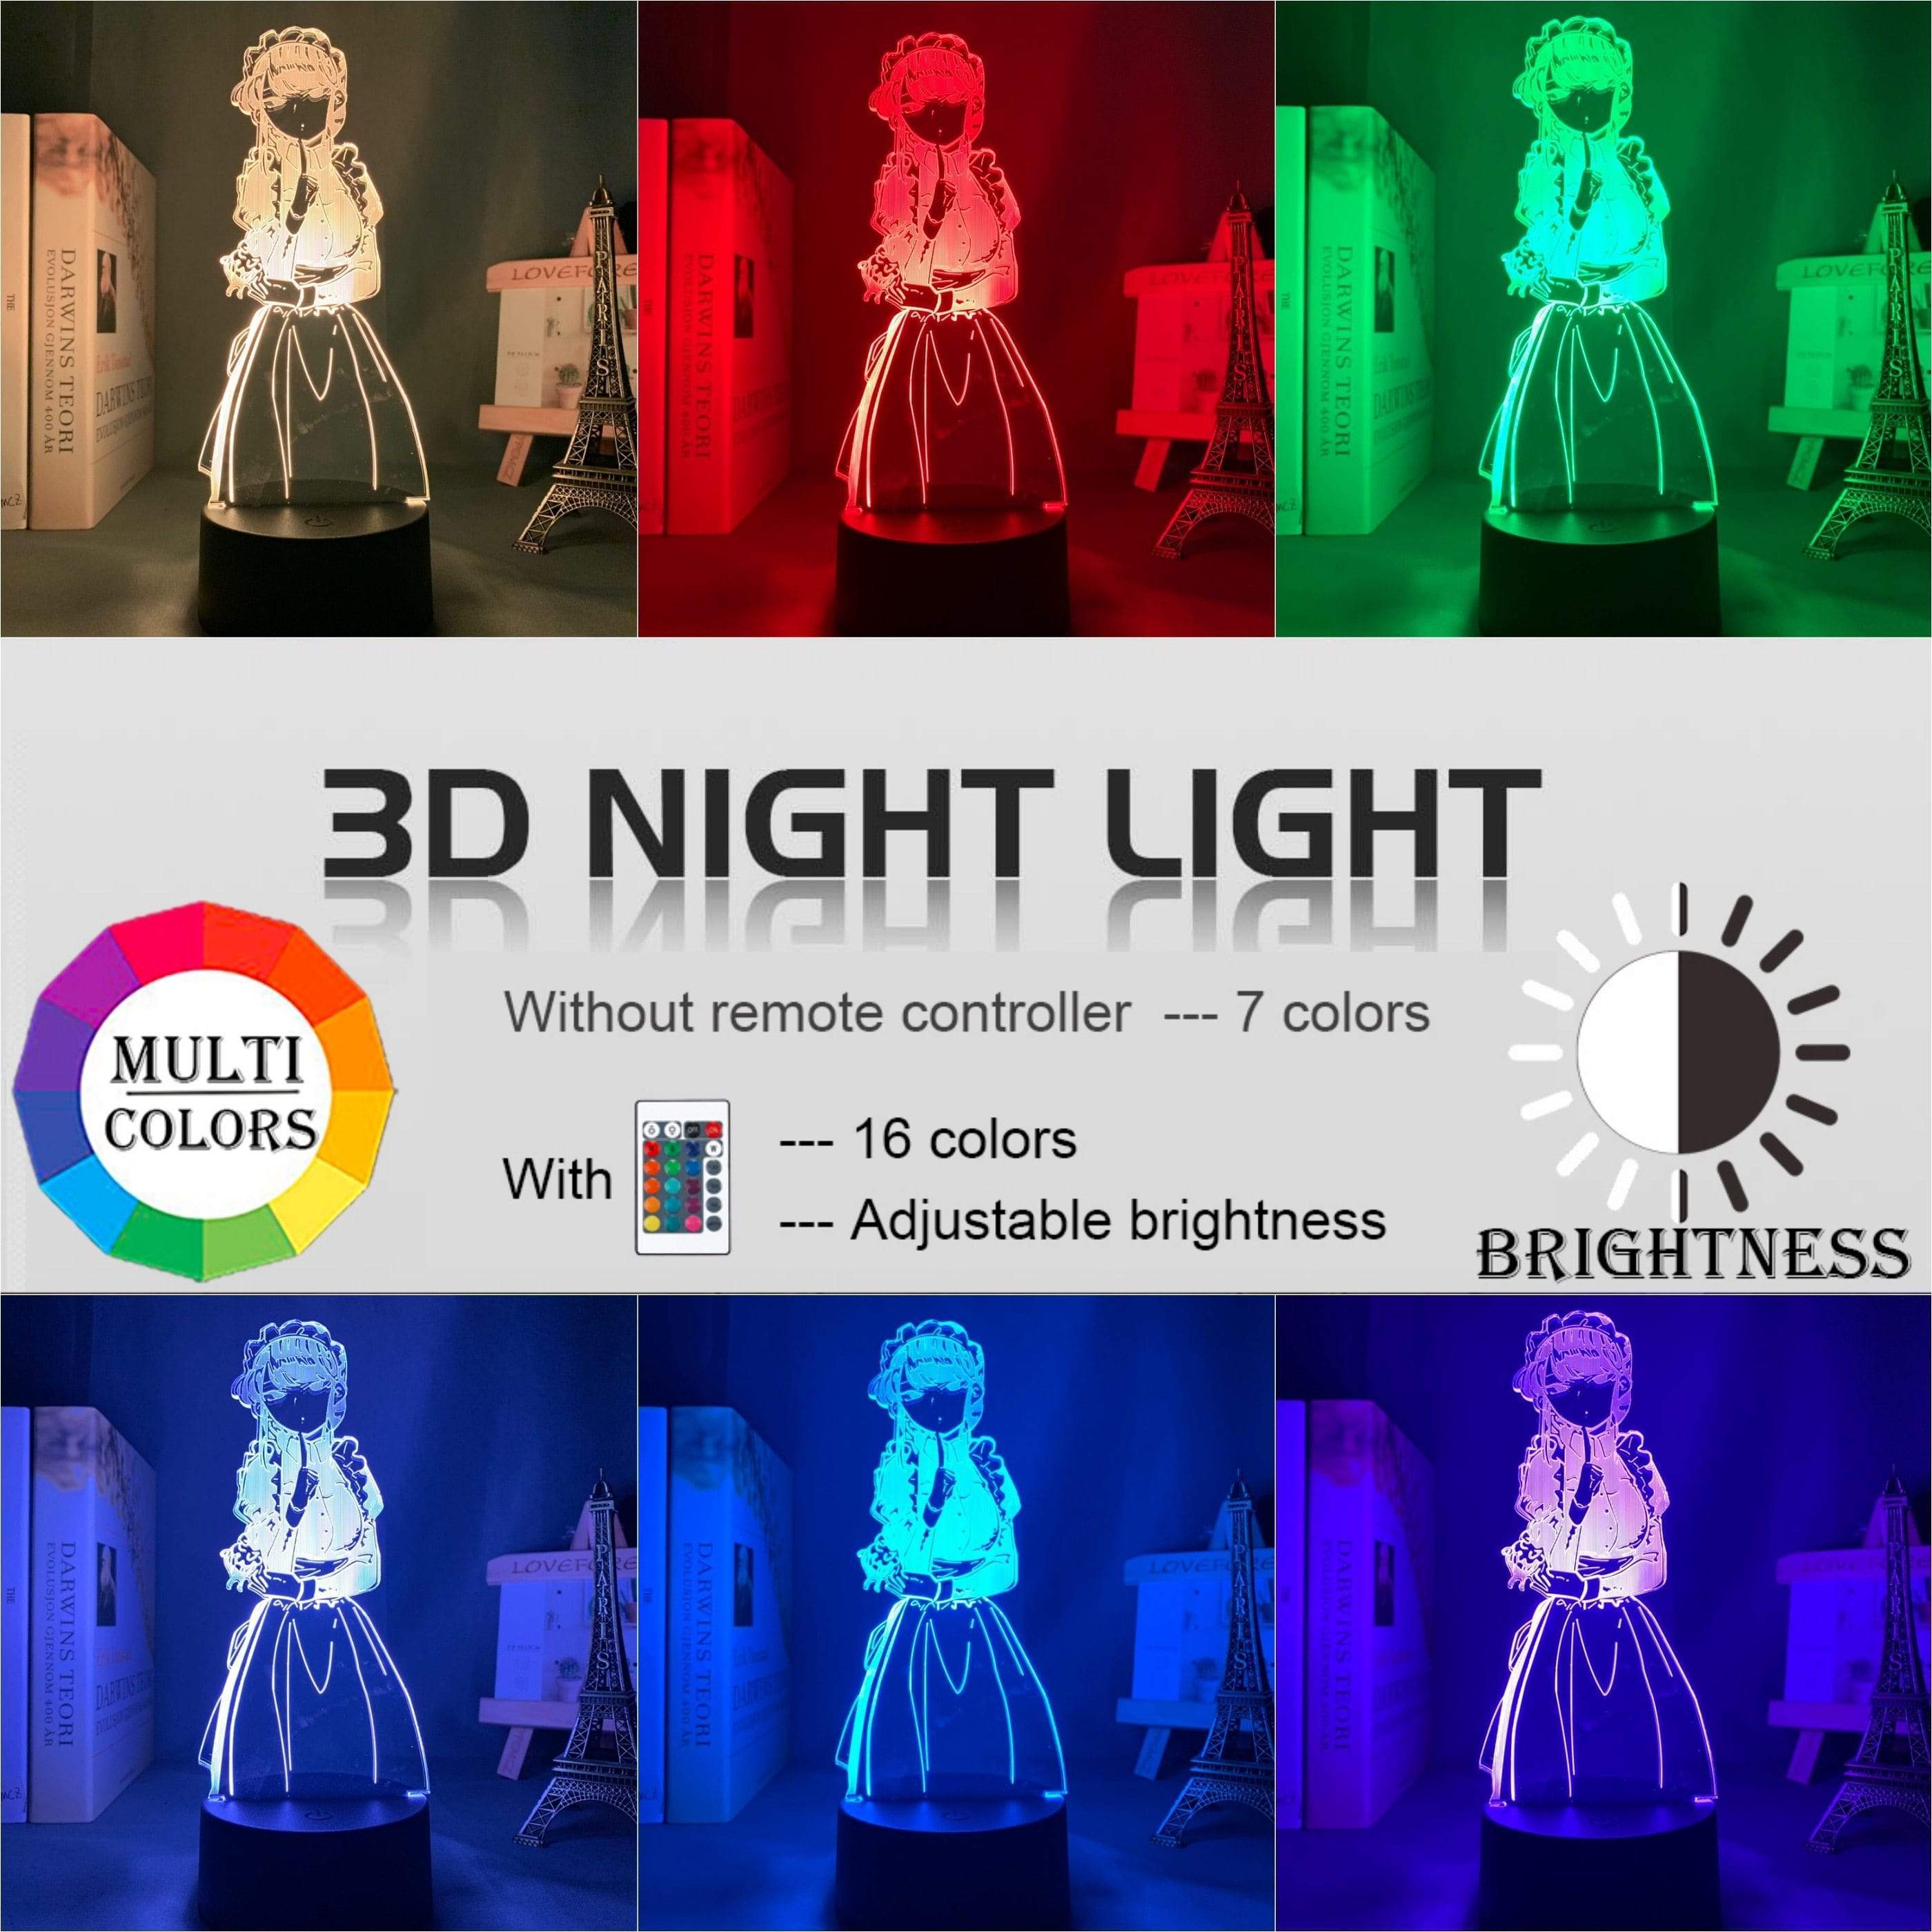 Lampe Komi Can't Communicate Anime Table Lamp for Kids Bedroom Decoration lampe led 3D